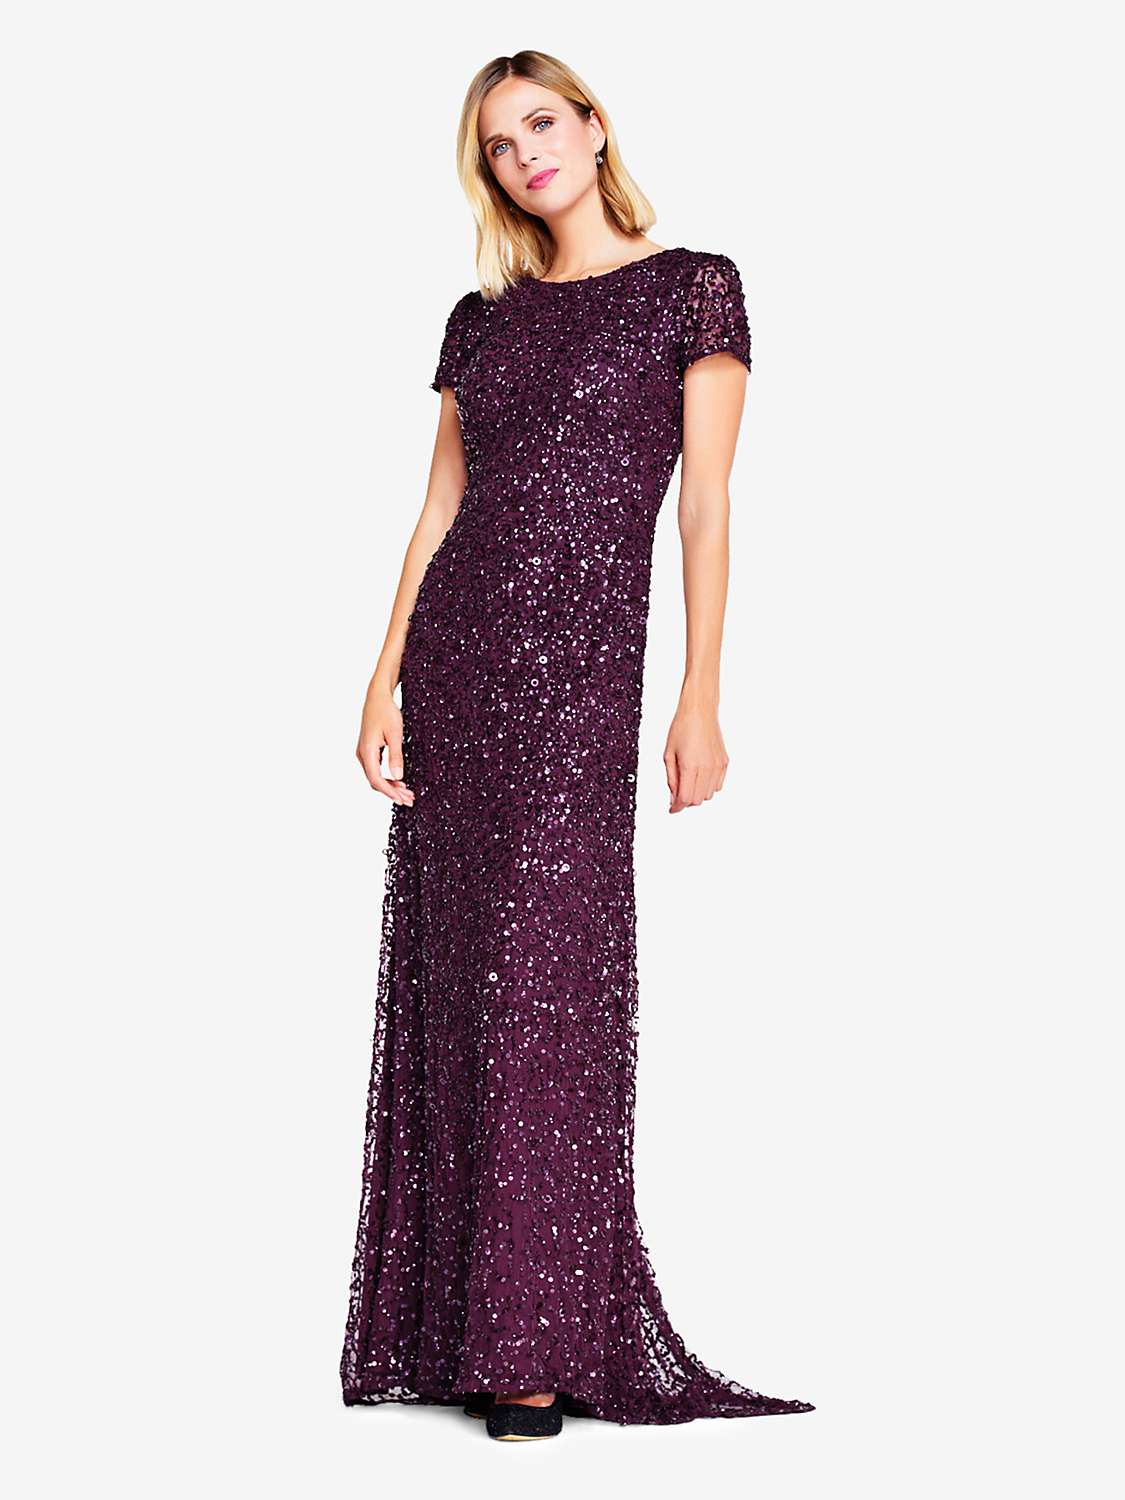 Buy Adrianna Papell Sequin Scoop Back Maxi Dress Online at johnlewis.com